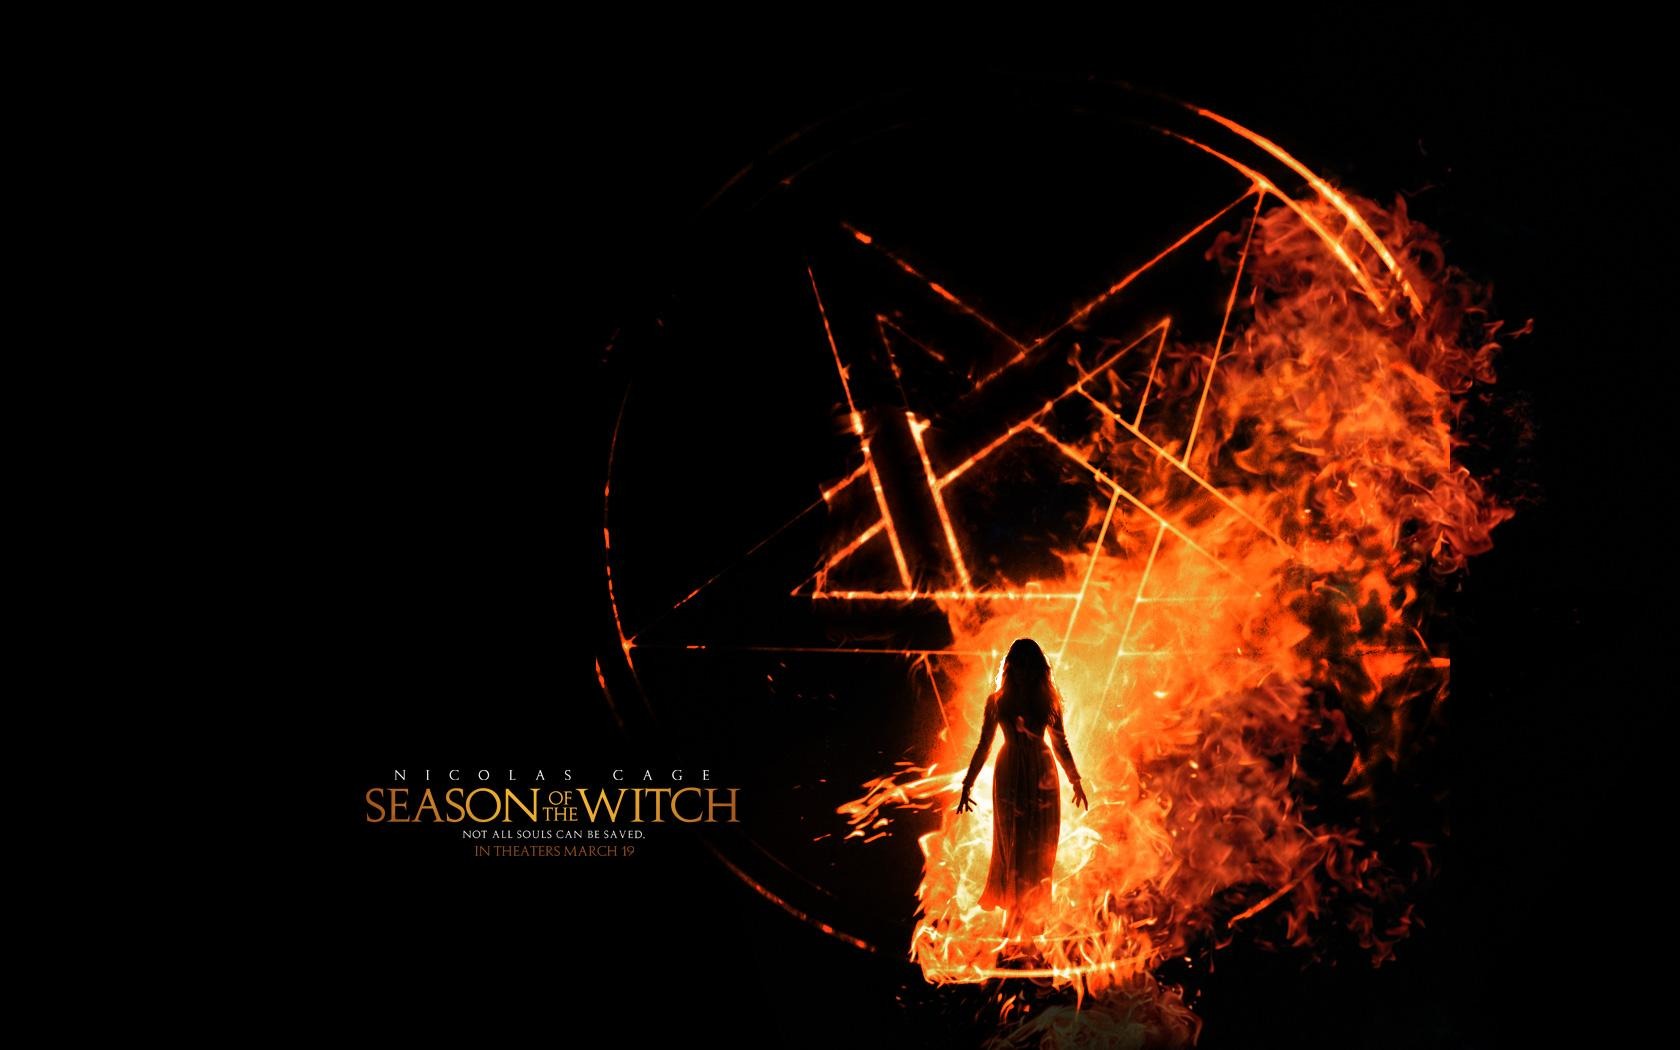 Season of the Witch 女巫季節 壁紙專輯 #37 - 1680x1050